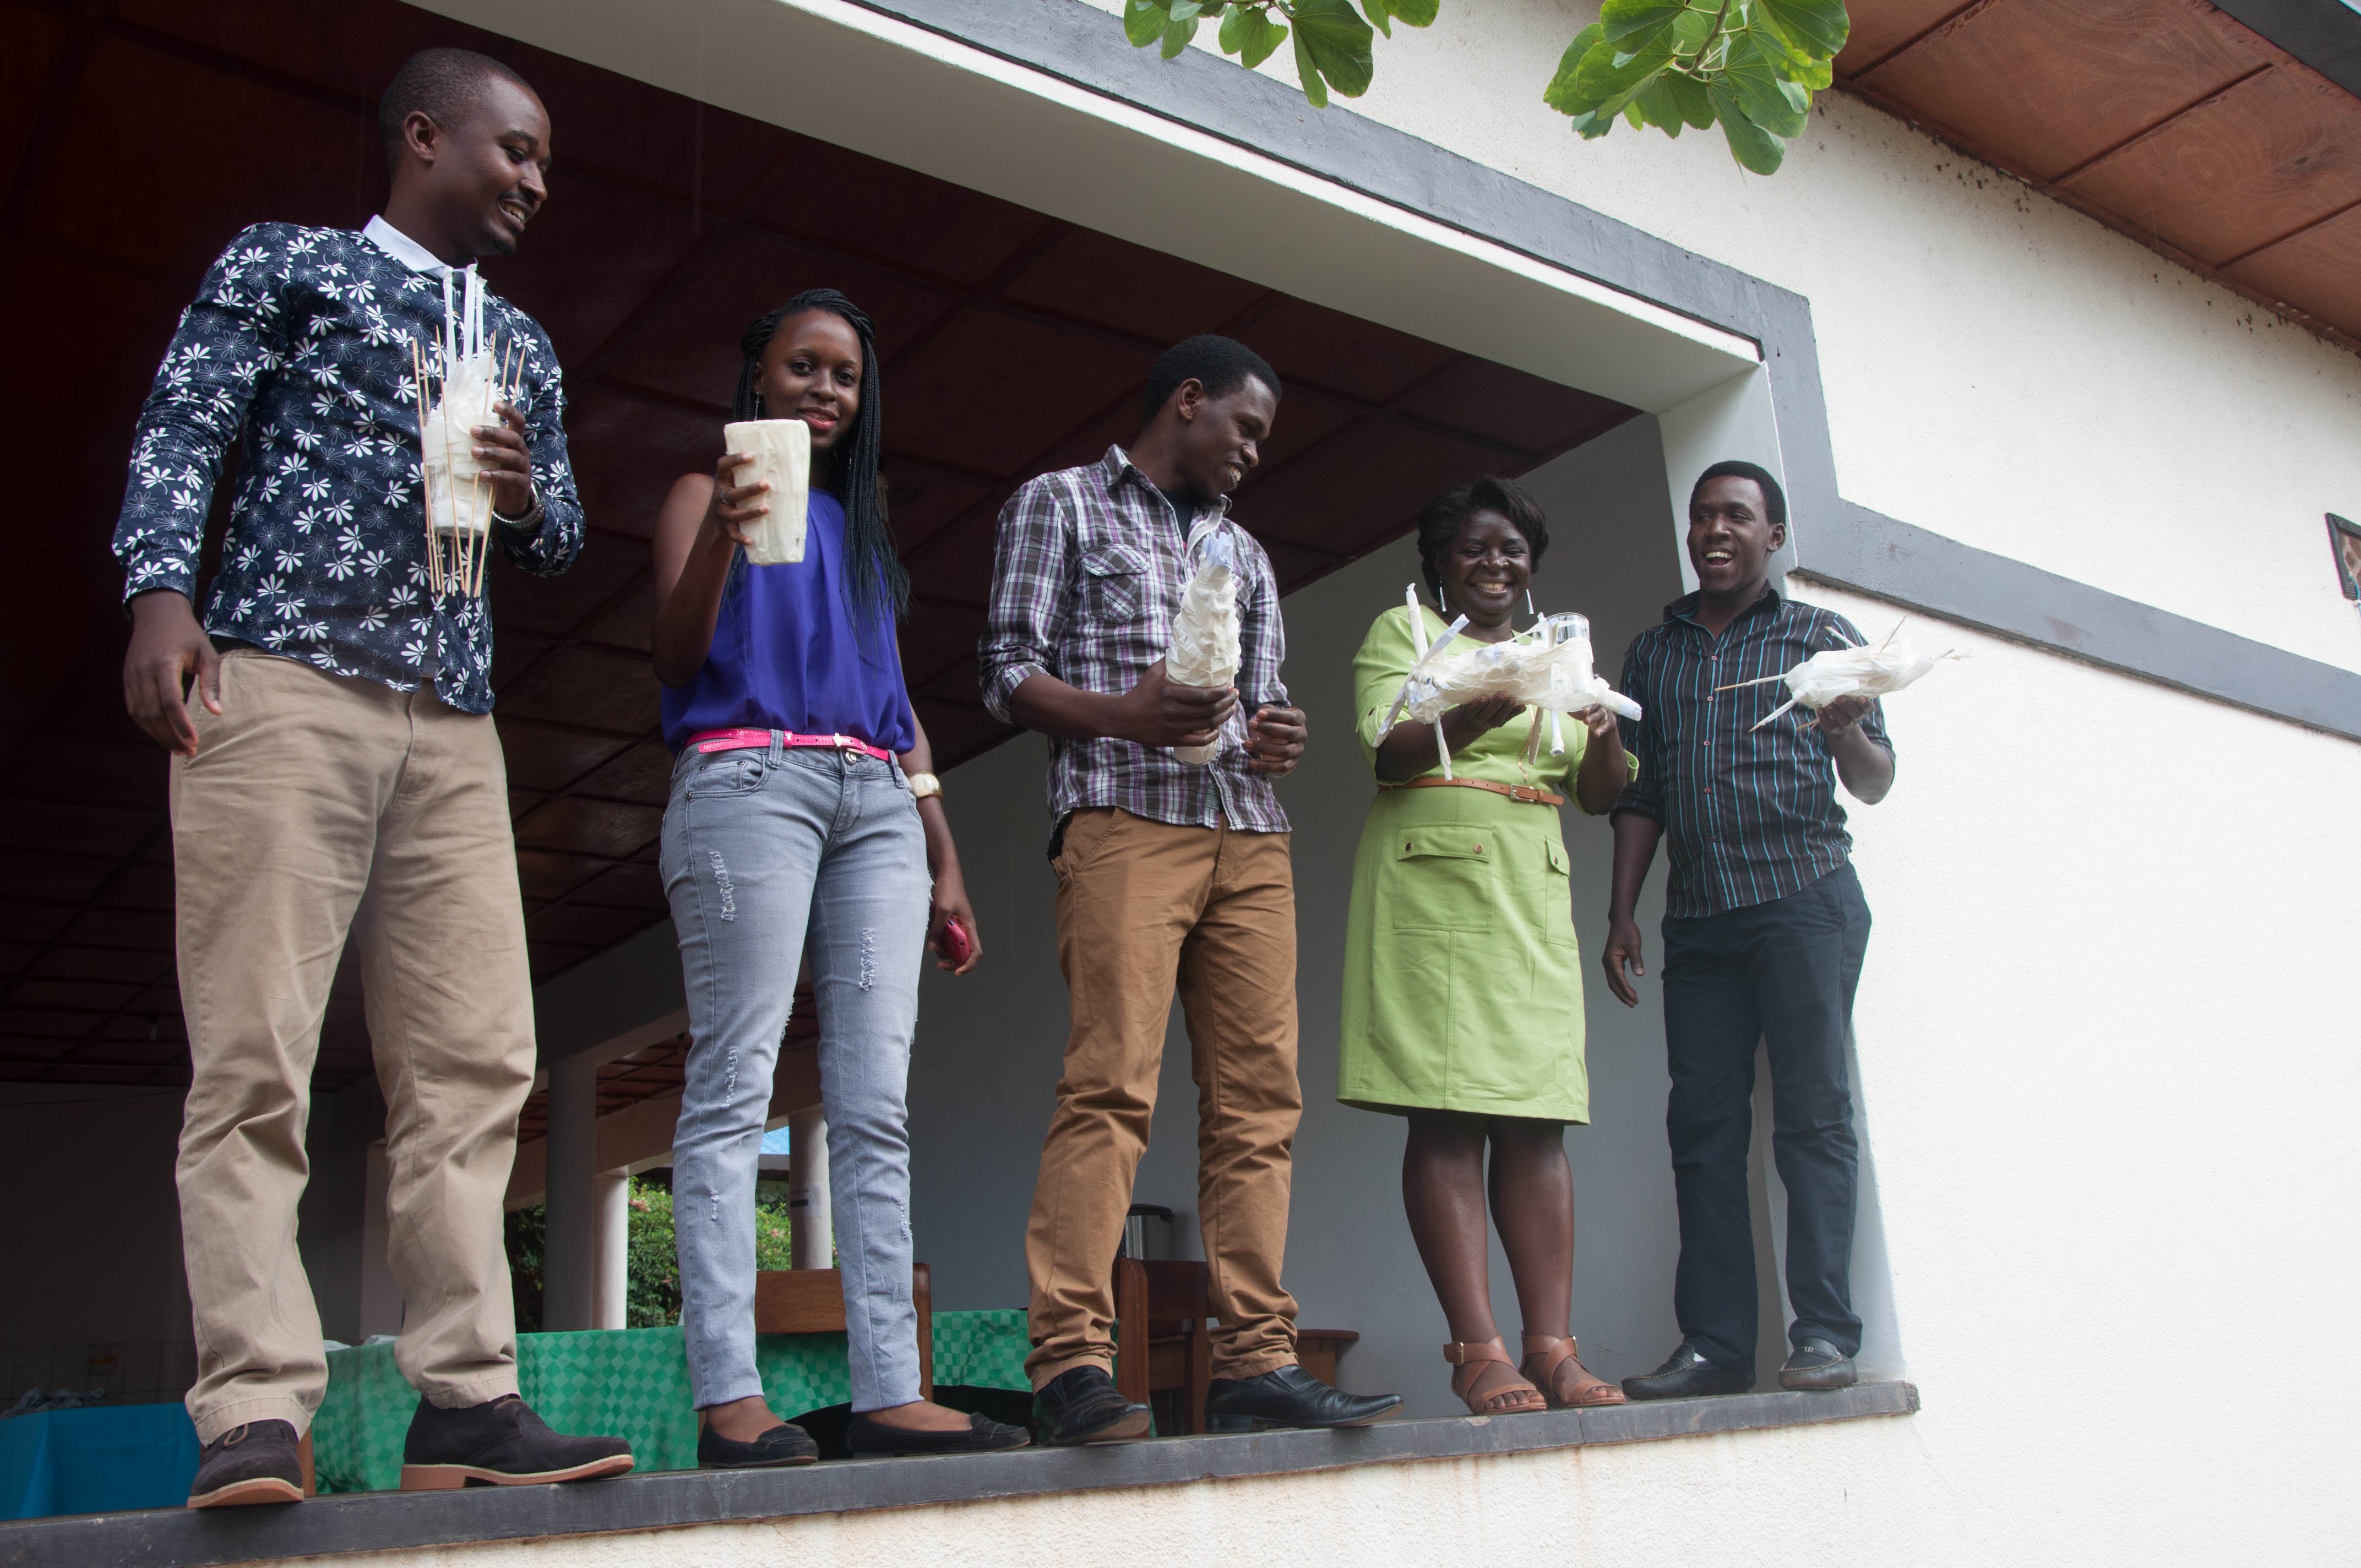 Dr. Amuguni leads MGHD Class of 2017 students in an exercise during their September 2015 intensive.